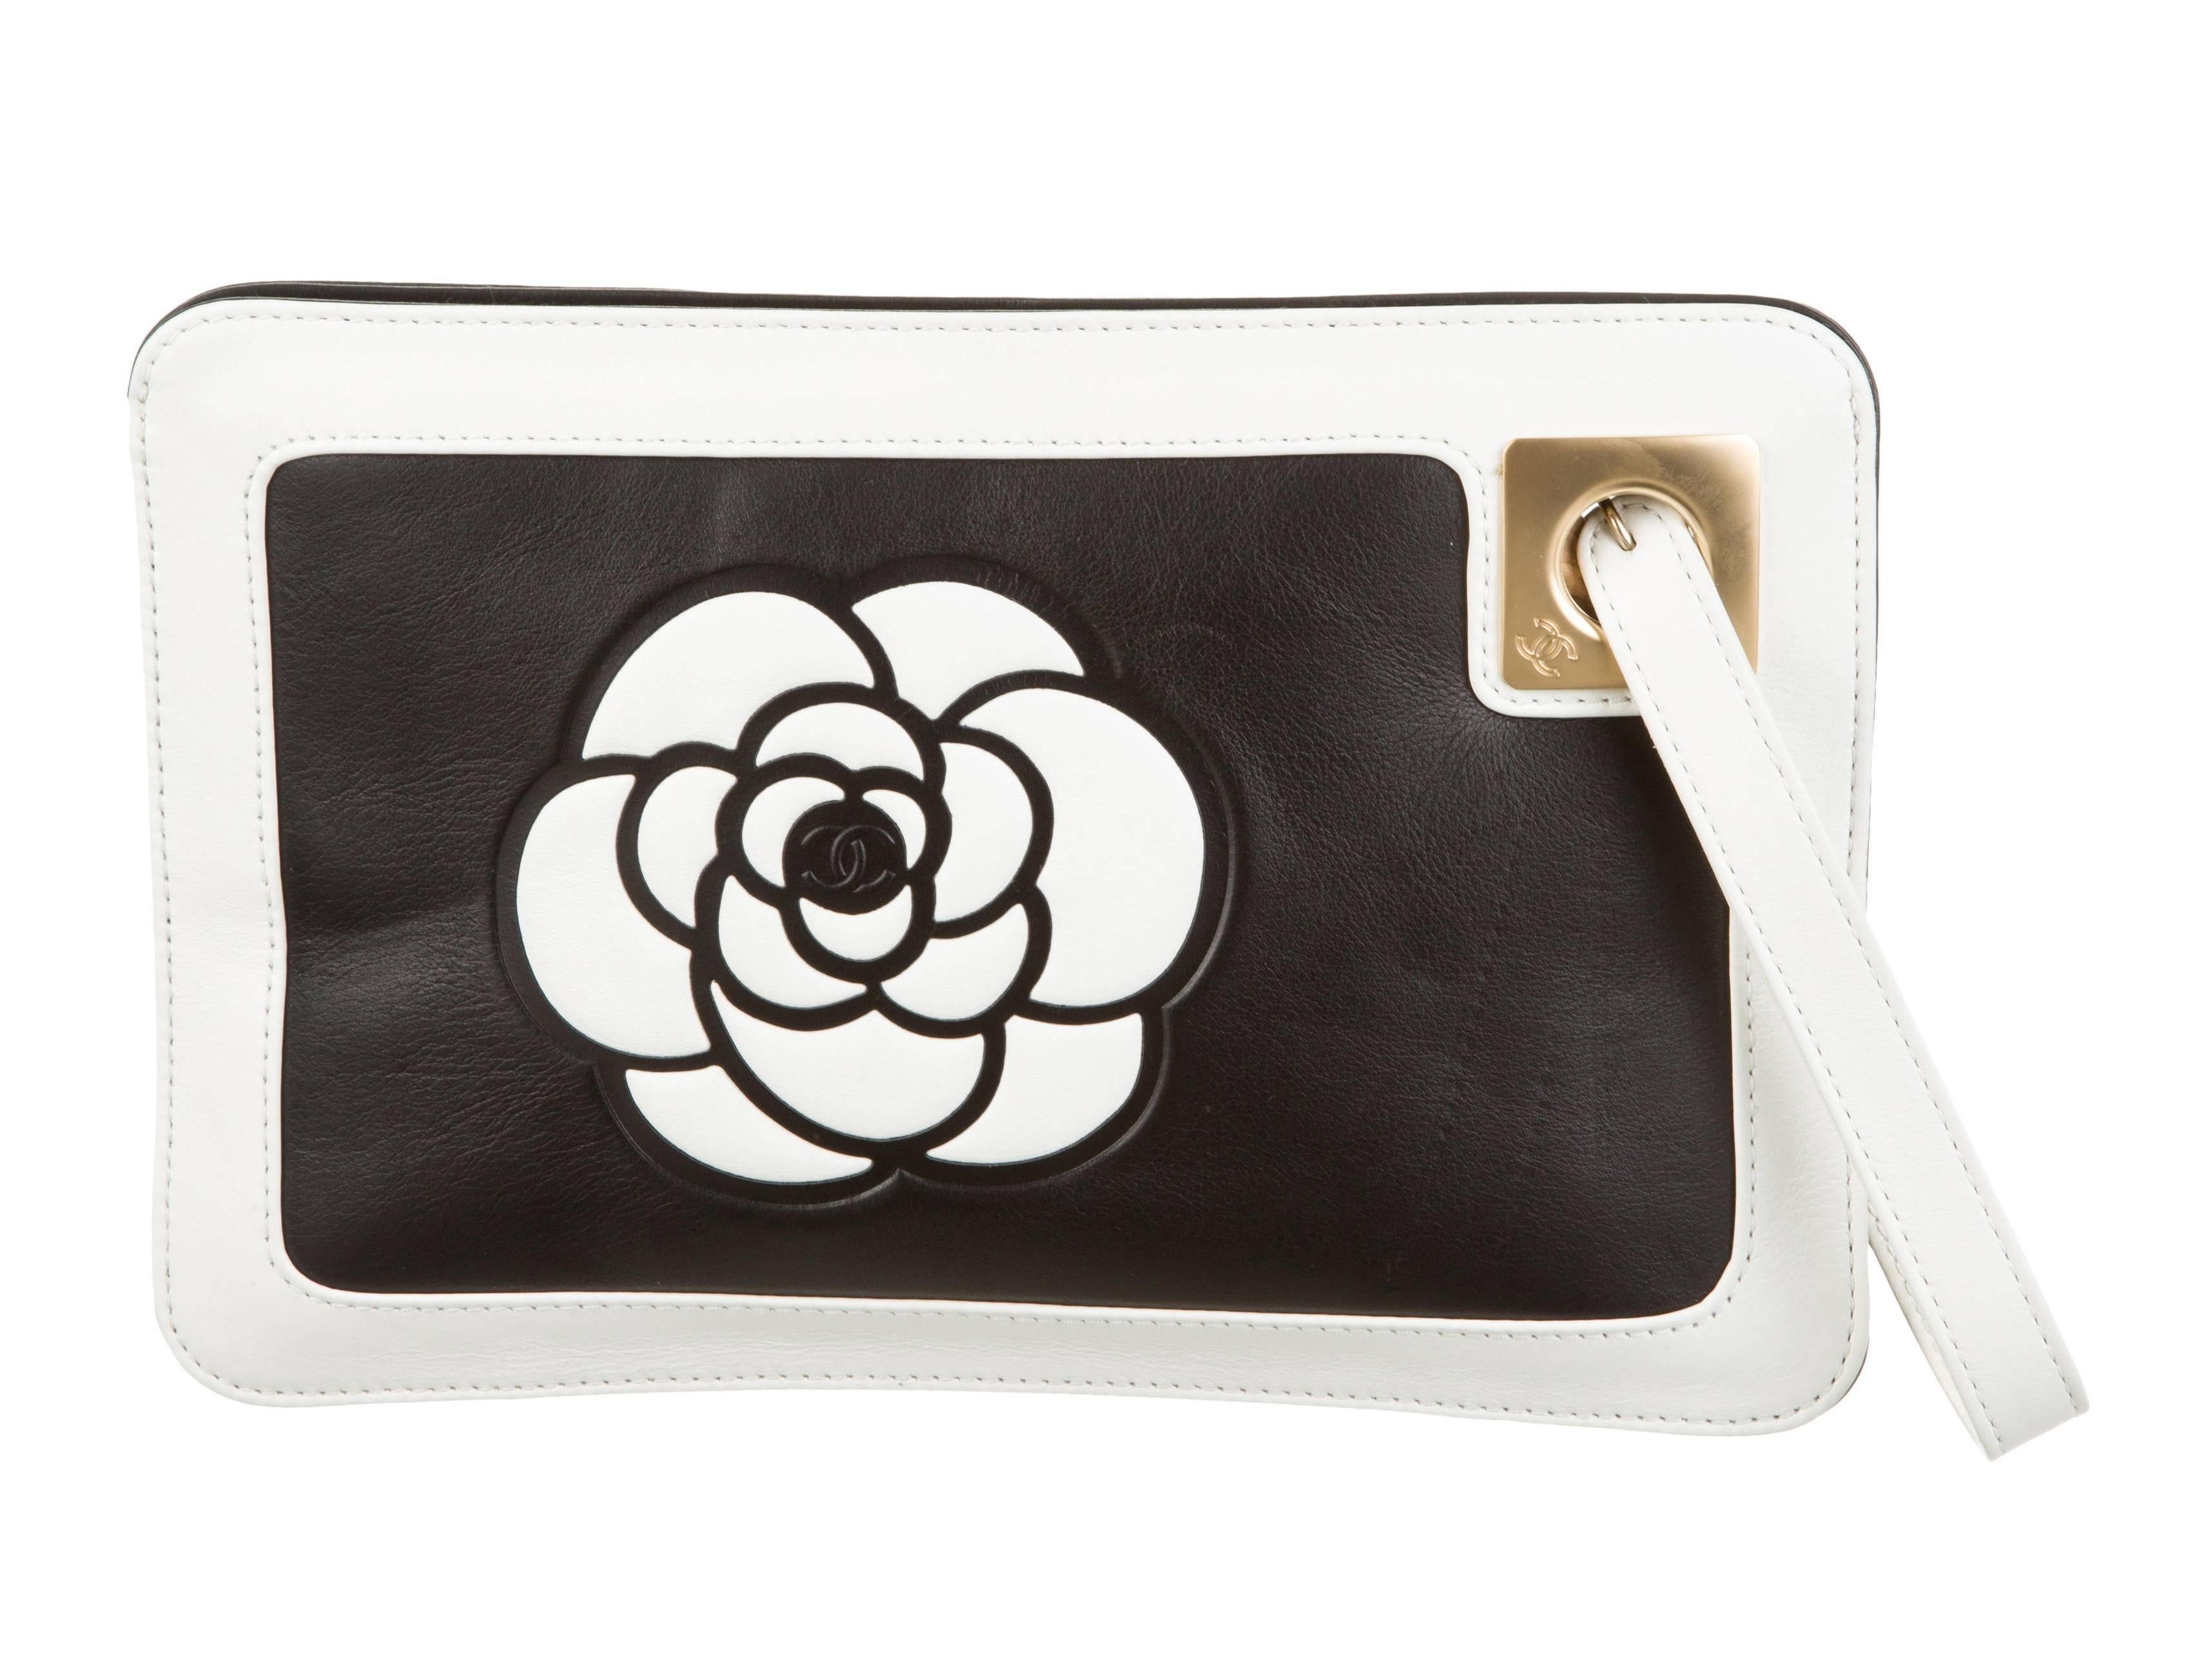 Black leather Chanel Camellia Wristlet clutch with gold-tone hardware, white leather trim, flat wrist strap, Camellia accent at front, logo at back, beige canvas lining, single pocket at interior wall and zip closure at top. Serial number reads